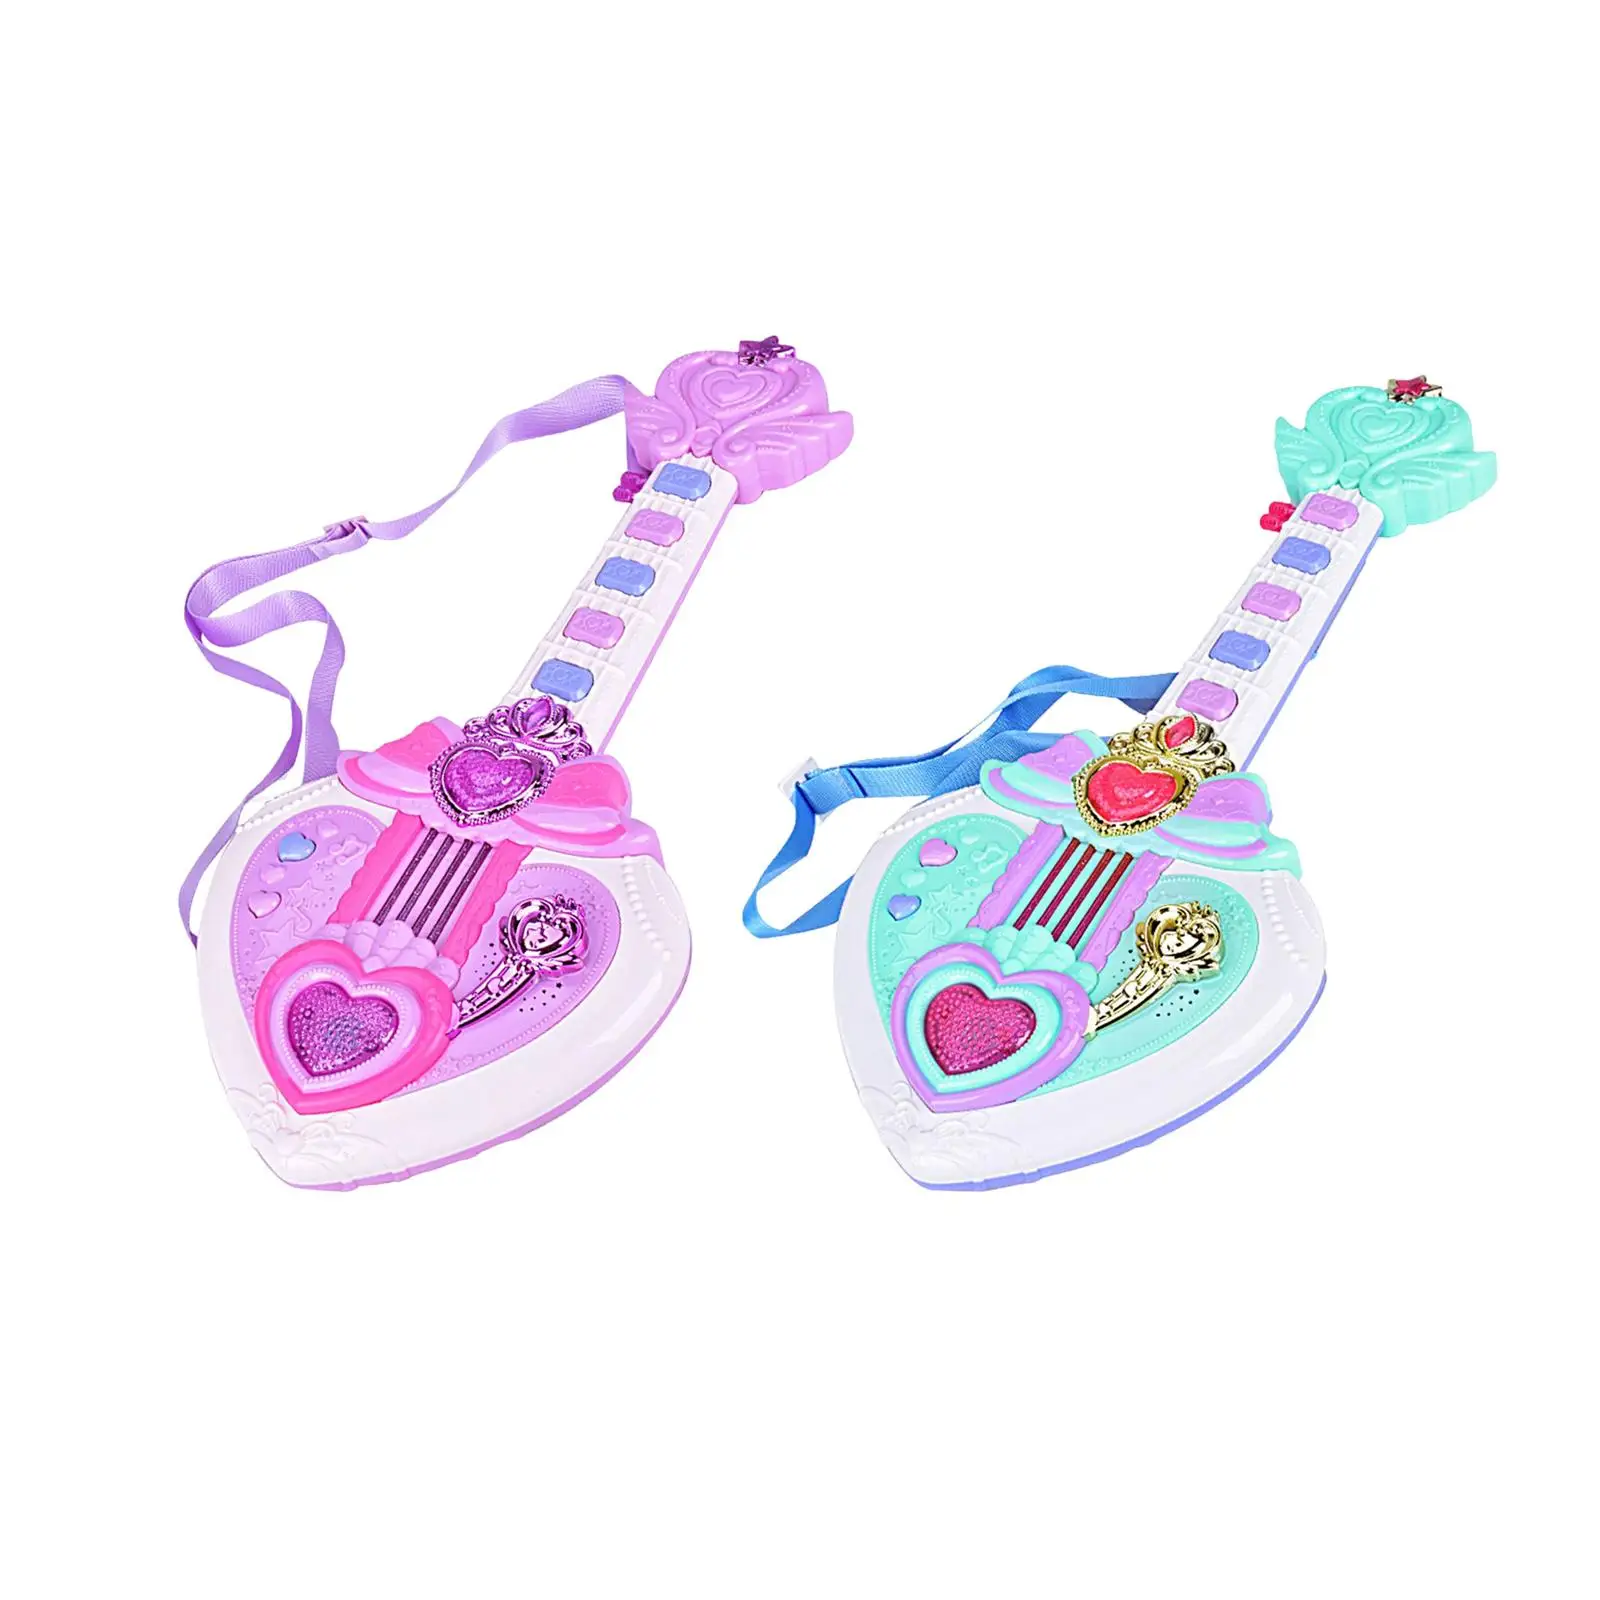 

Montessori Mini Guitars Toys with Lights Ineteractive Preschool Learning Sounds Toy Instruments for Beginner Boys Girls Baby